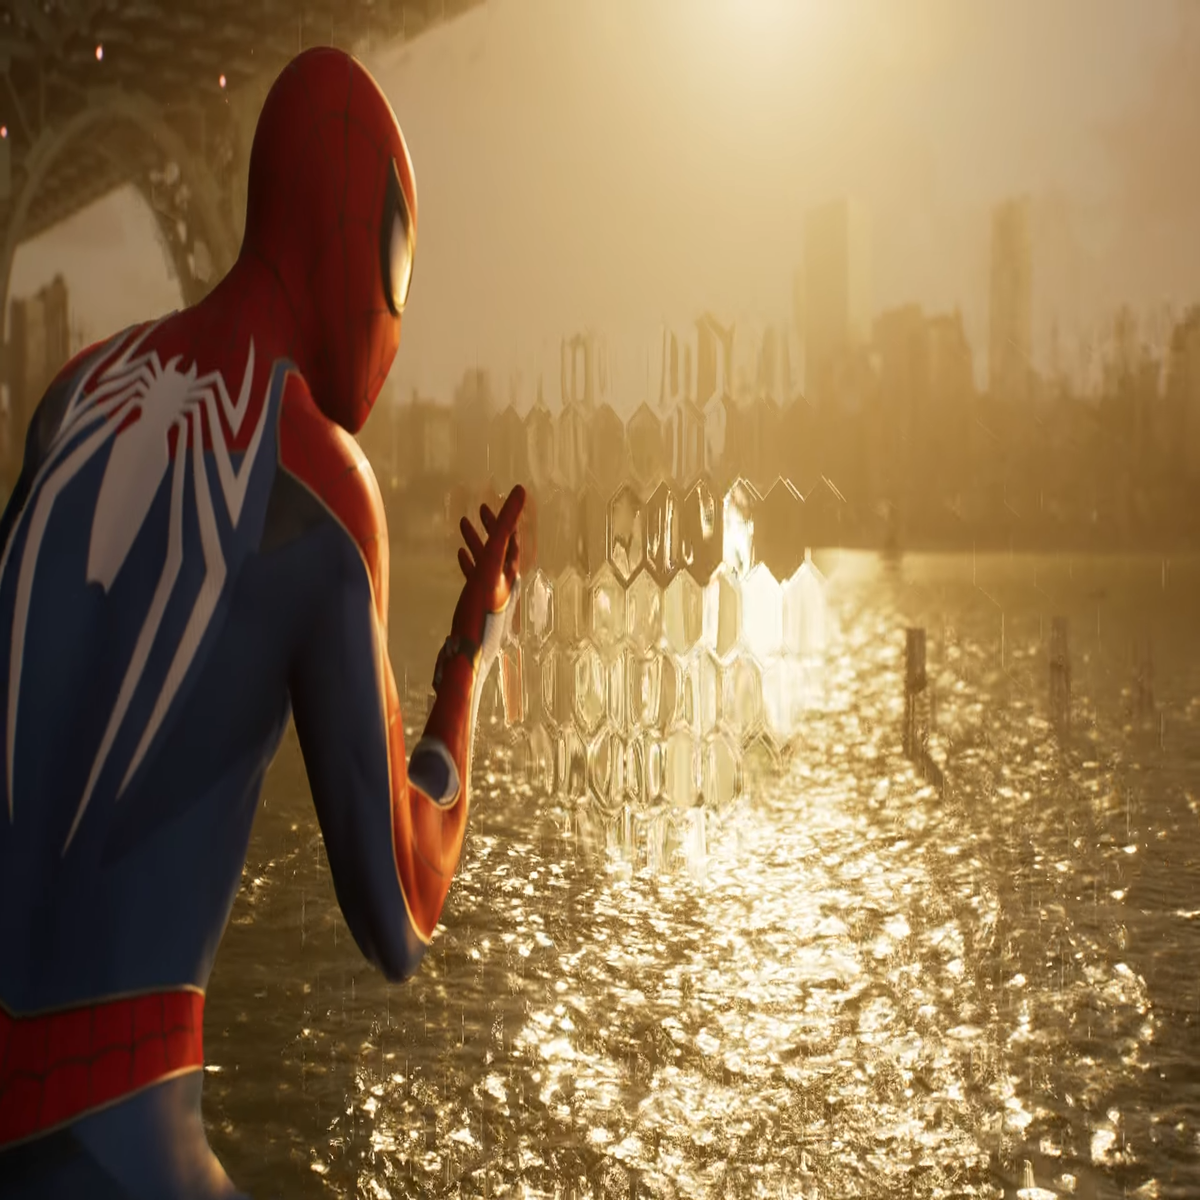 Marvel's Spider-Man 2 has over 65 suits (and over 200 ways to customise  them)